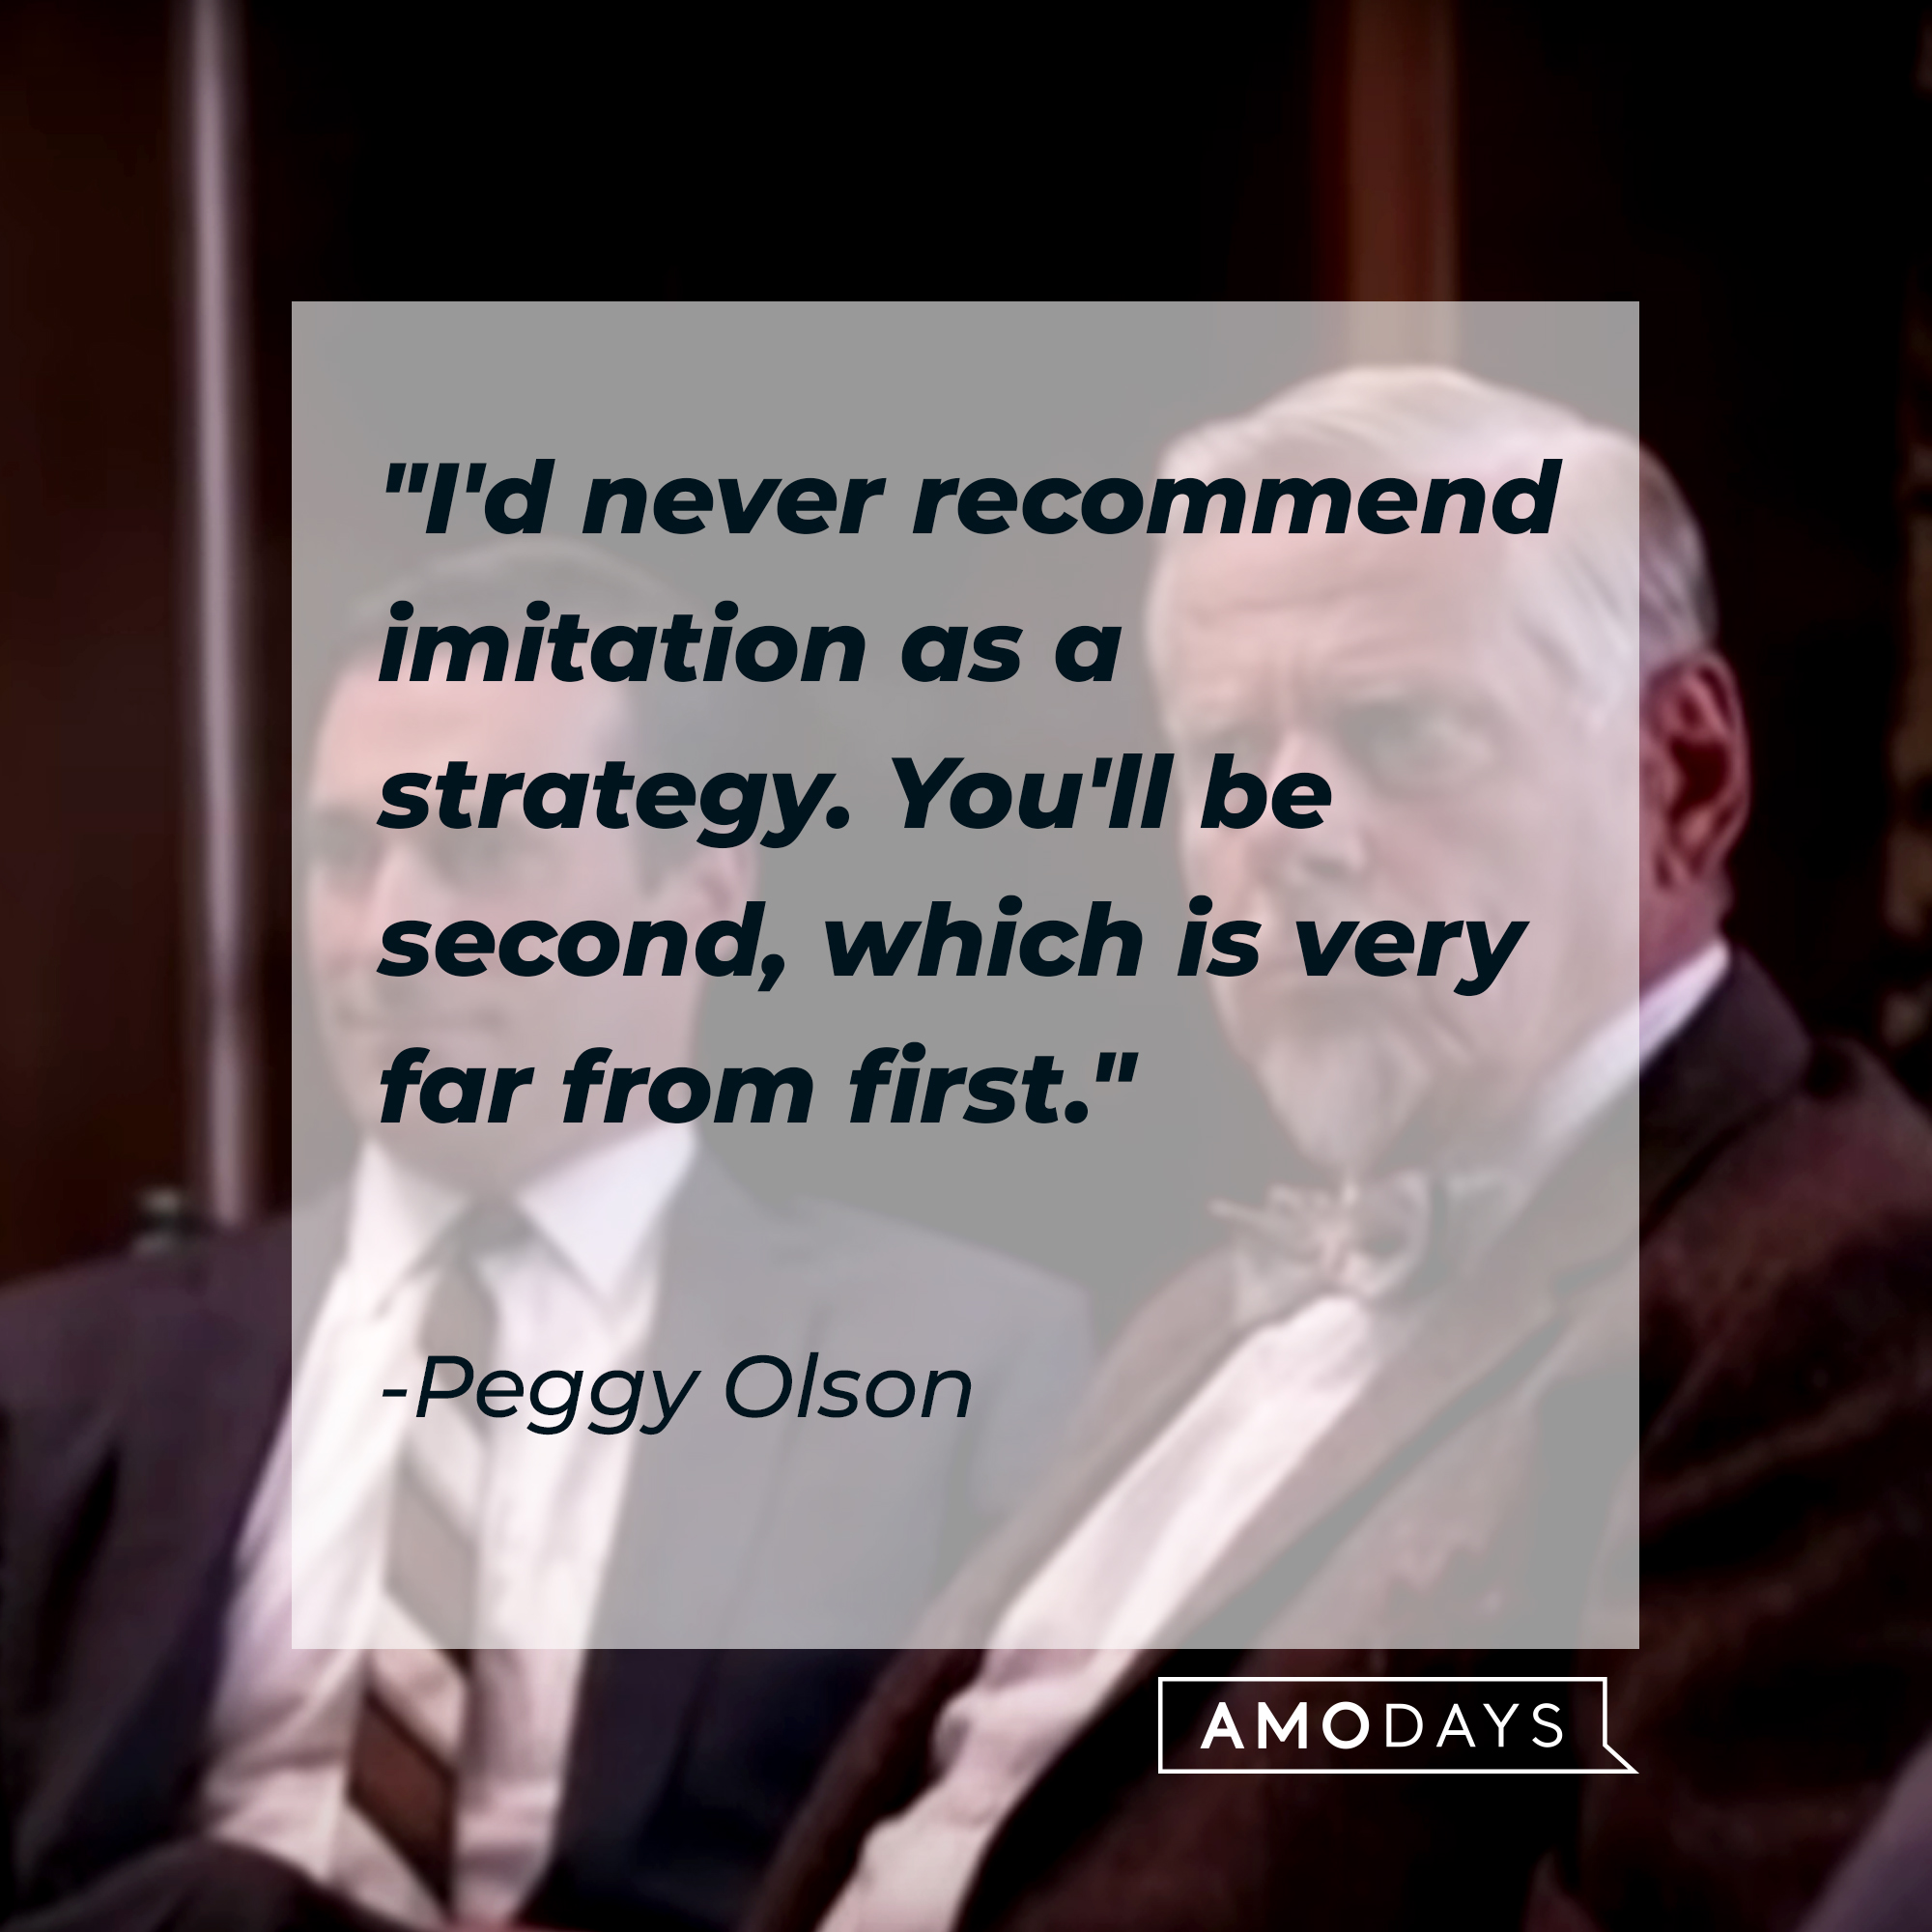 Peggy Olson's quote: "I'd never recommend imitation as a strategy. You'll be second, which is very far from first." | Source: Facebook.com/MadMen